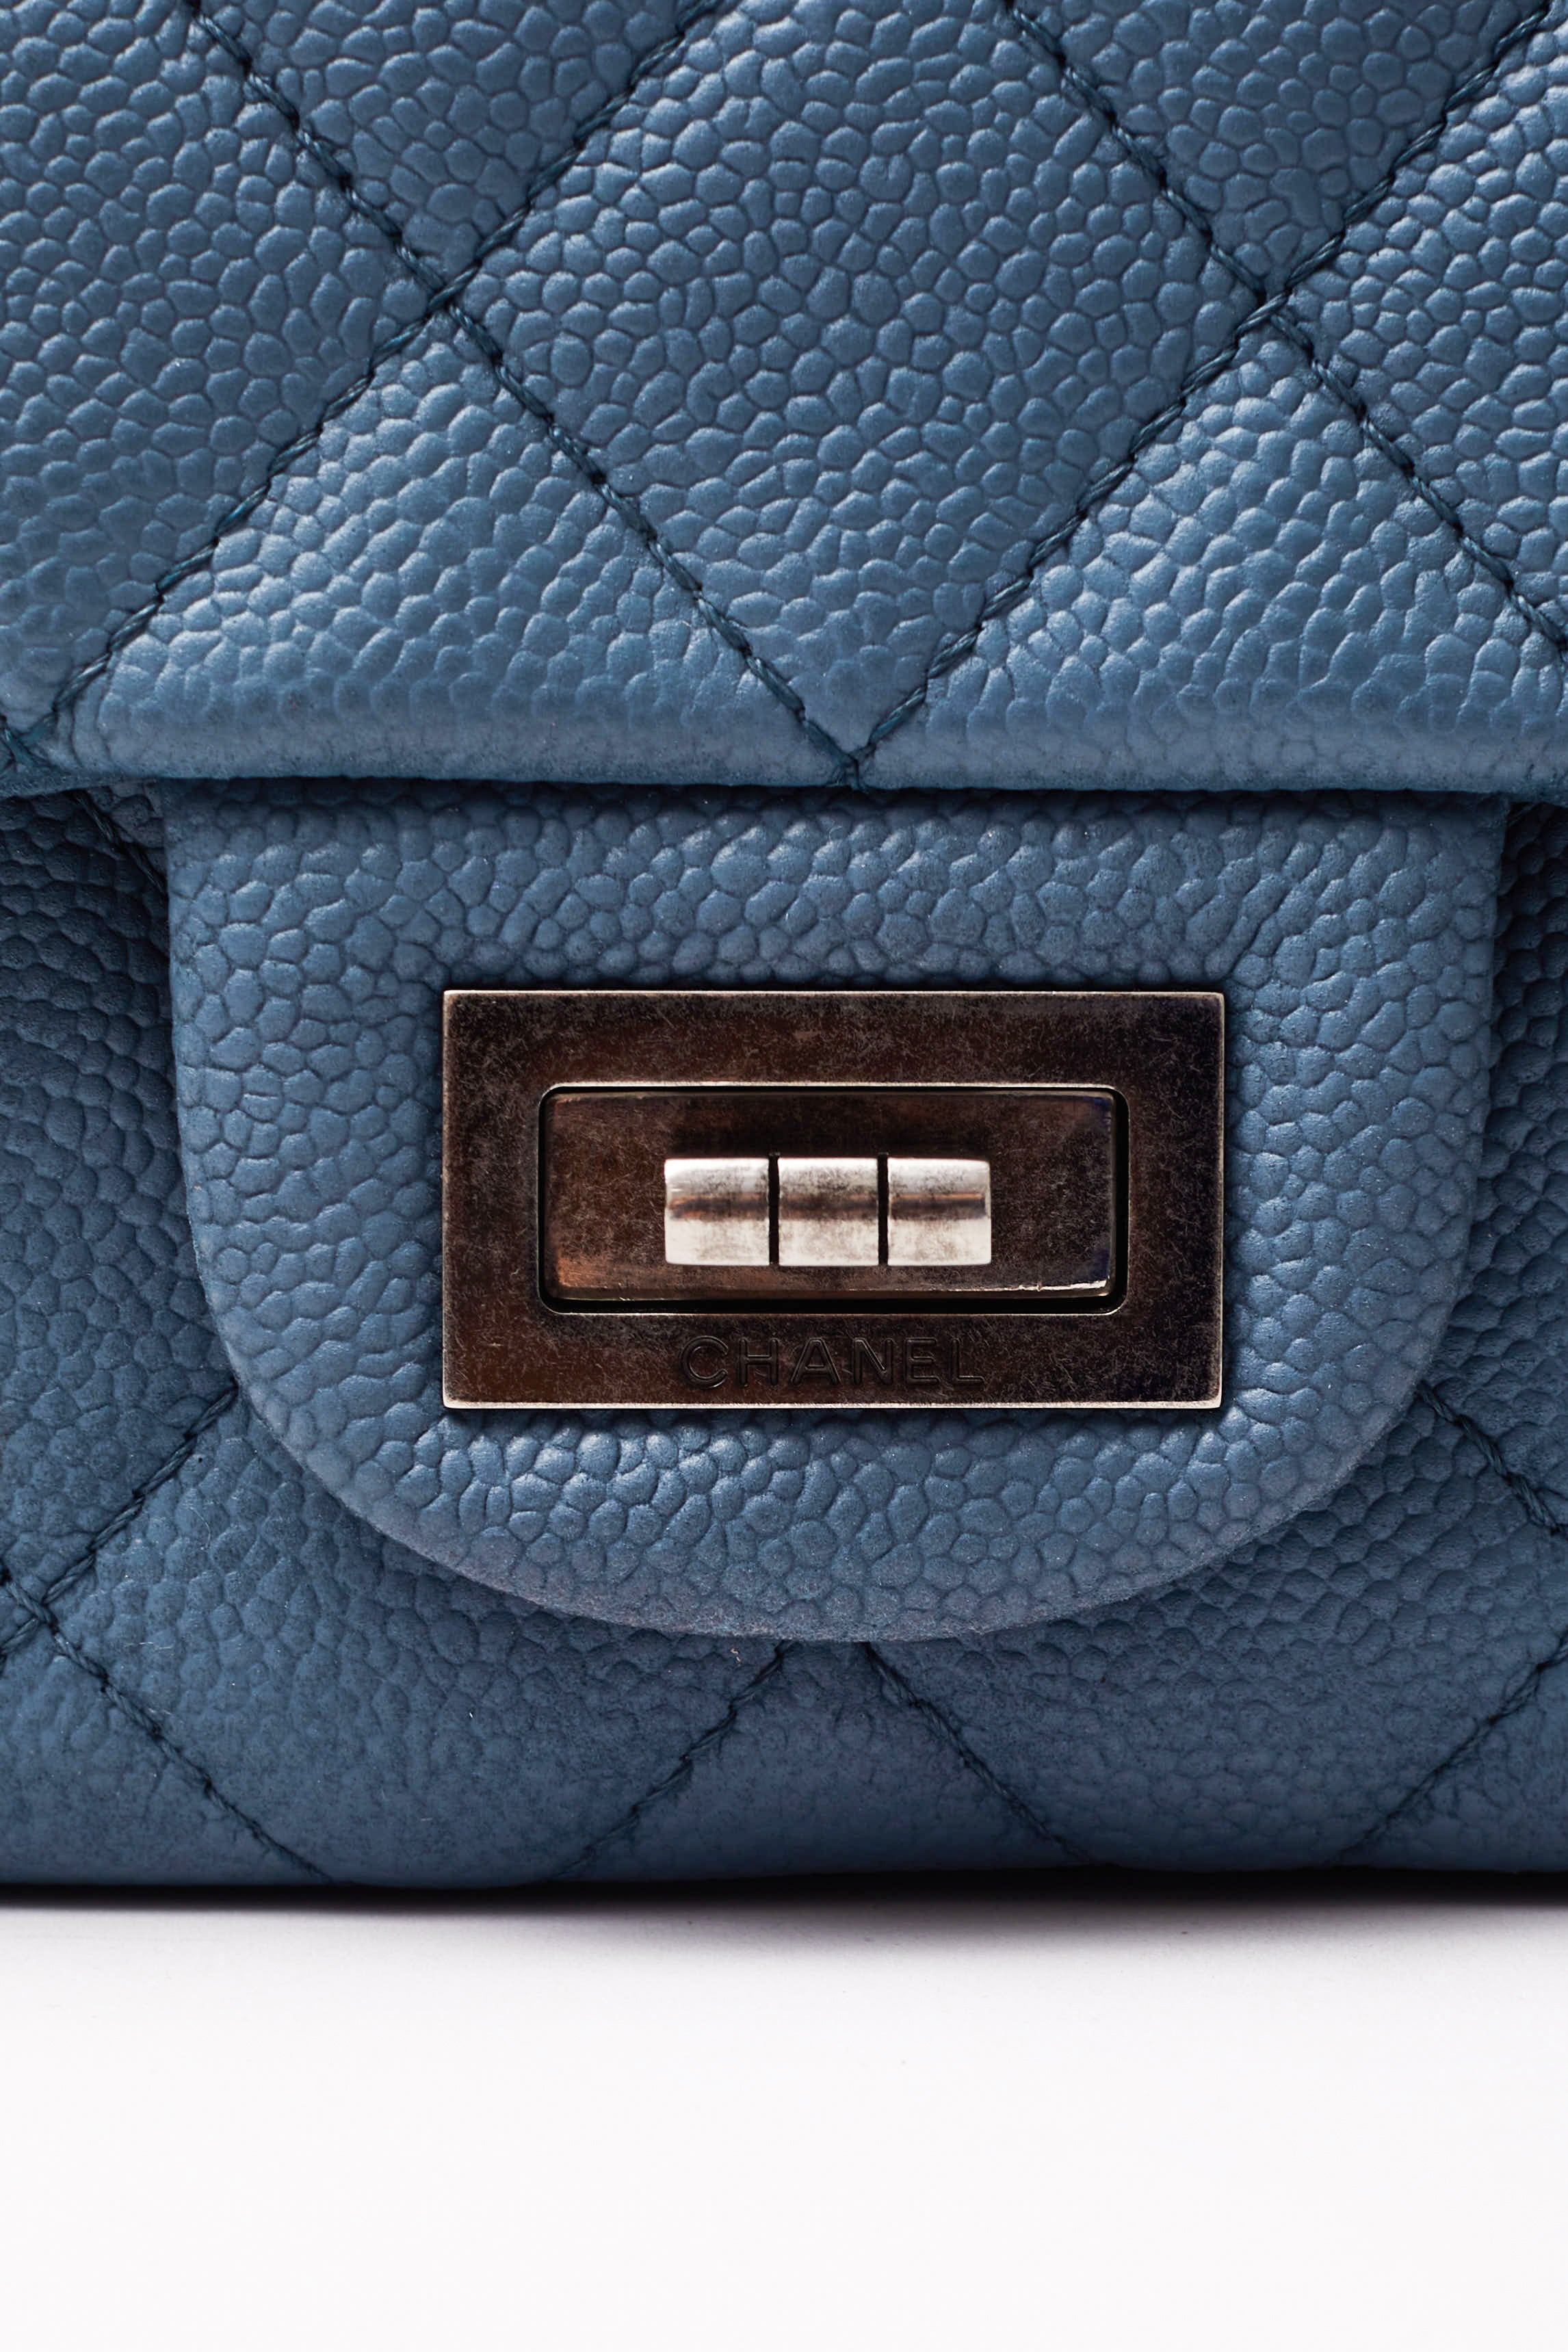 Chanel <br> Pre-Fall 2013 large 2.55 bag with gunmetal gray hardware